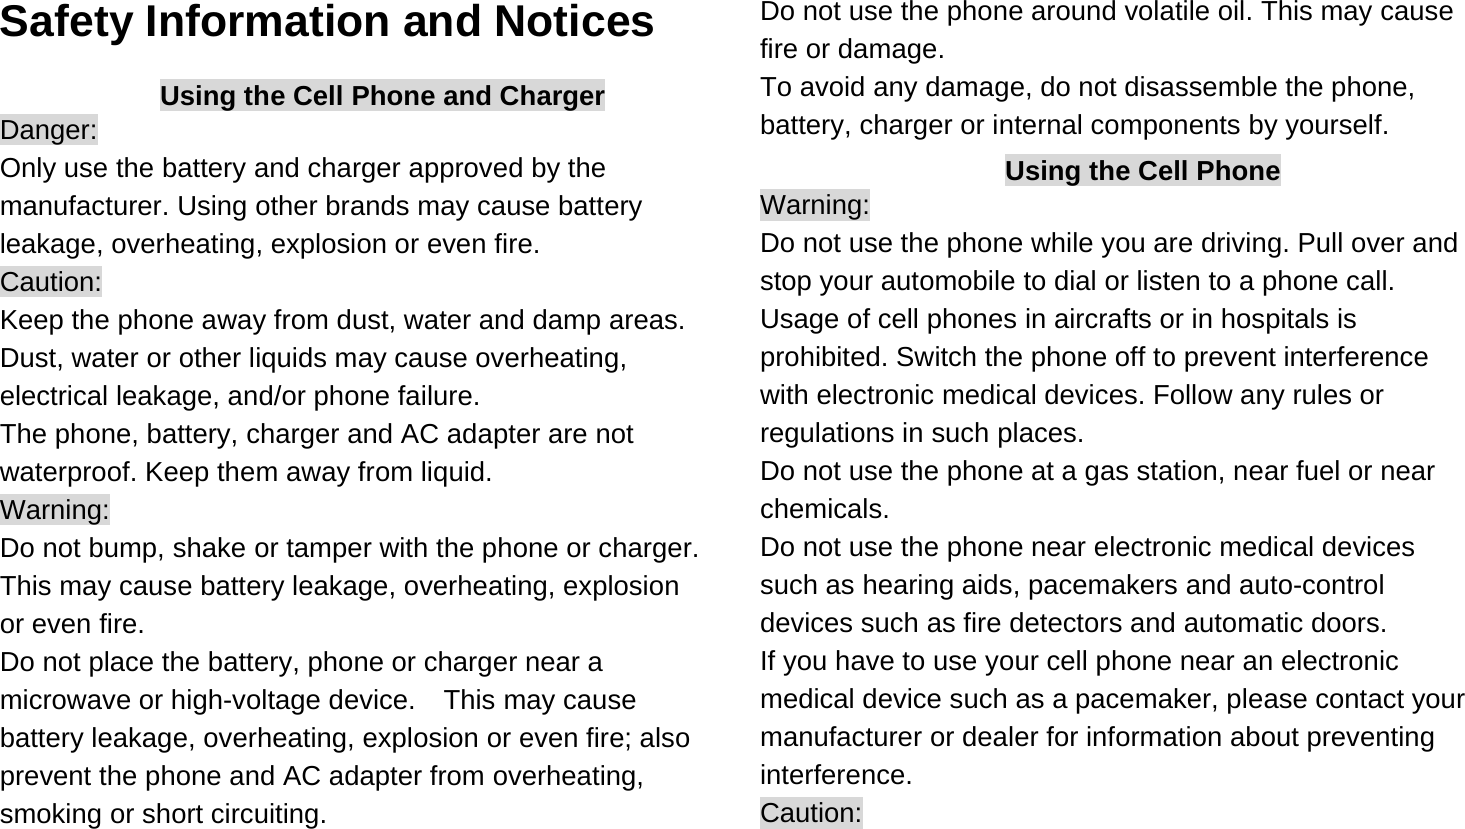  Safety Information and Notices Using the Cell Phone and Charger Danger: Only use the battery and charger approved by the manufacturer. Using other brands may cause battery leakage, overheating, explosion or even fire. Caution: Keep the phone away from dust, water and damp areas. Dust, water or other liquids may cause overheating, electrical leakage, and/or phone failure.   The phone, battery, charger and AC adapter are not waterproof. Keep them away from liquid. Warning: Do not bump, shake or tamper with the phone or charger. This may cause battery leakage, overheating, explosion or even fire. Do not place the battery, phone or charger near a microwave or high-voltage device.    This may cause battery leakage, overheating, explosion or even fire; also prevent the phone and AC adapter from overheating, smoking or short circuiting. Do not use the phone around volatile oil. This may cause fire or damage. To avoid any damage, do not disassemble the phone, battery, charger or internal components by yourself. Using the Cell Phone Warning: Do not use the phone while you are driving. Pull over and stop your automobile to dial or listen to a phone call. Usage of cell phones in aircrafts or in hospitals is prohibited. Switch the phone off to prevent interference with electronic medical devices. Follow any rules or regulations in such places. Do not use the phone at a gas station, near fuel or near chemicals. Do not use the phone near electronic medical devices such as hearing aids, pacemakers and auto-control devices such as fire detectors and automatic doors.   If you have to use your cell phone near an electronic medical device such as a pacemaker, please contact your manufacturer or dealer for information about preventing interference. Caution: 